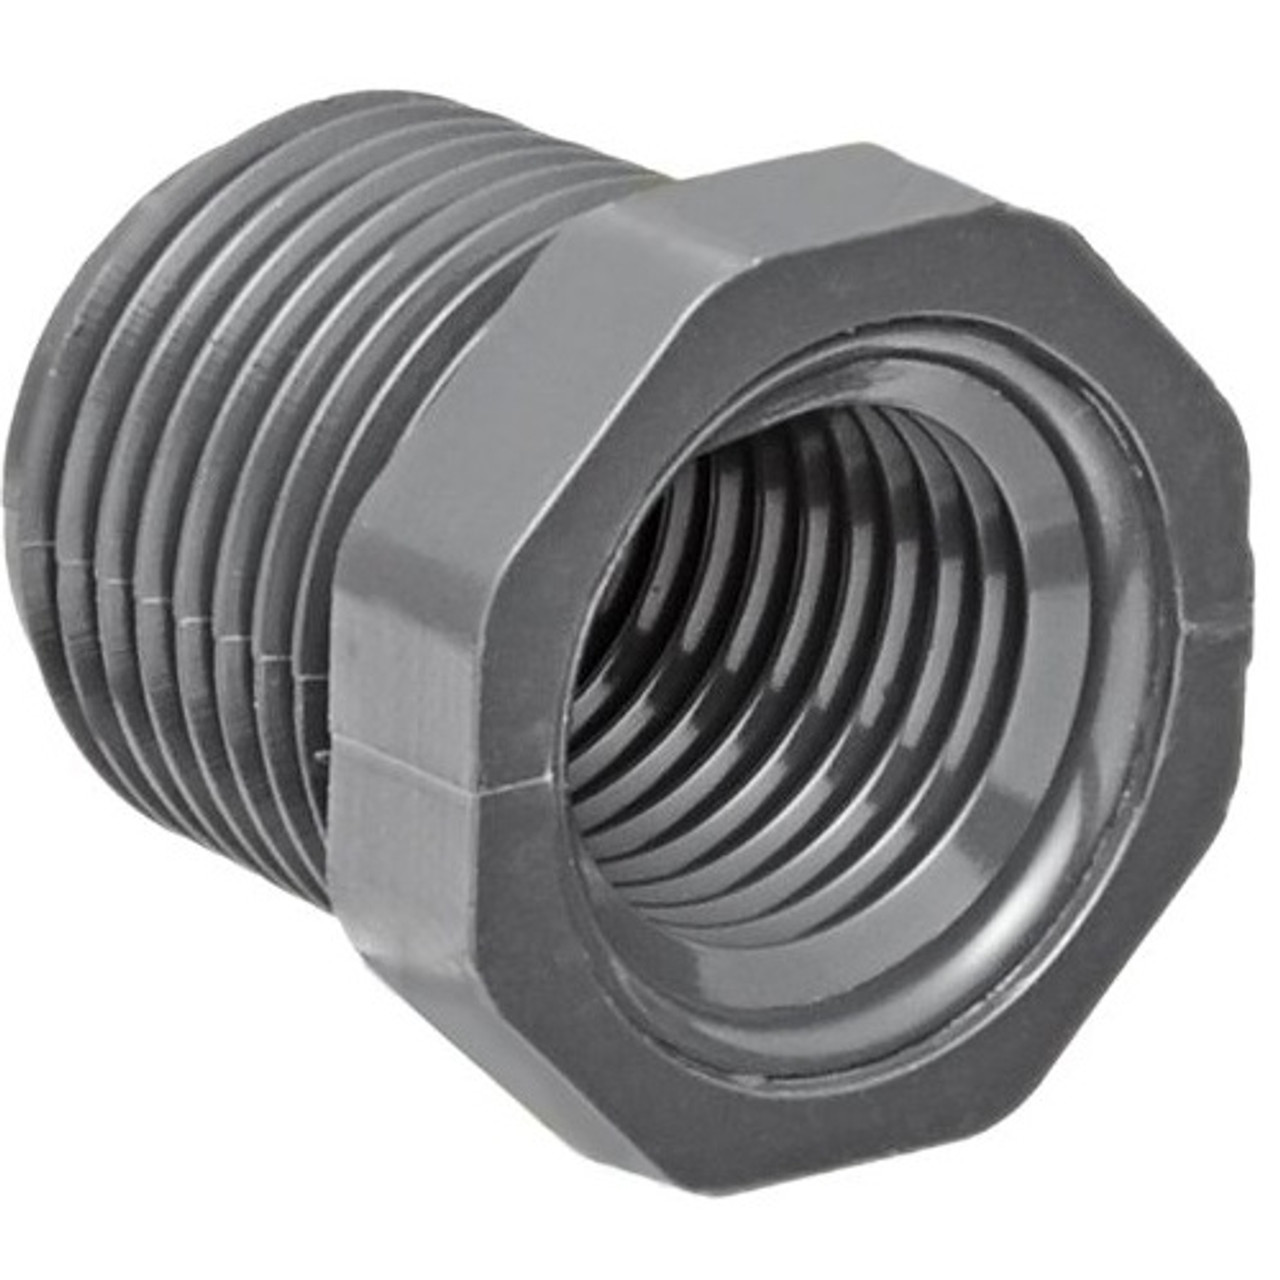 Schedule 40 PVC FPT Reducing Coupling-FPT Size:3/4"-FPT Size:1/2" 